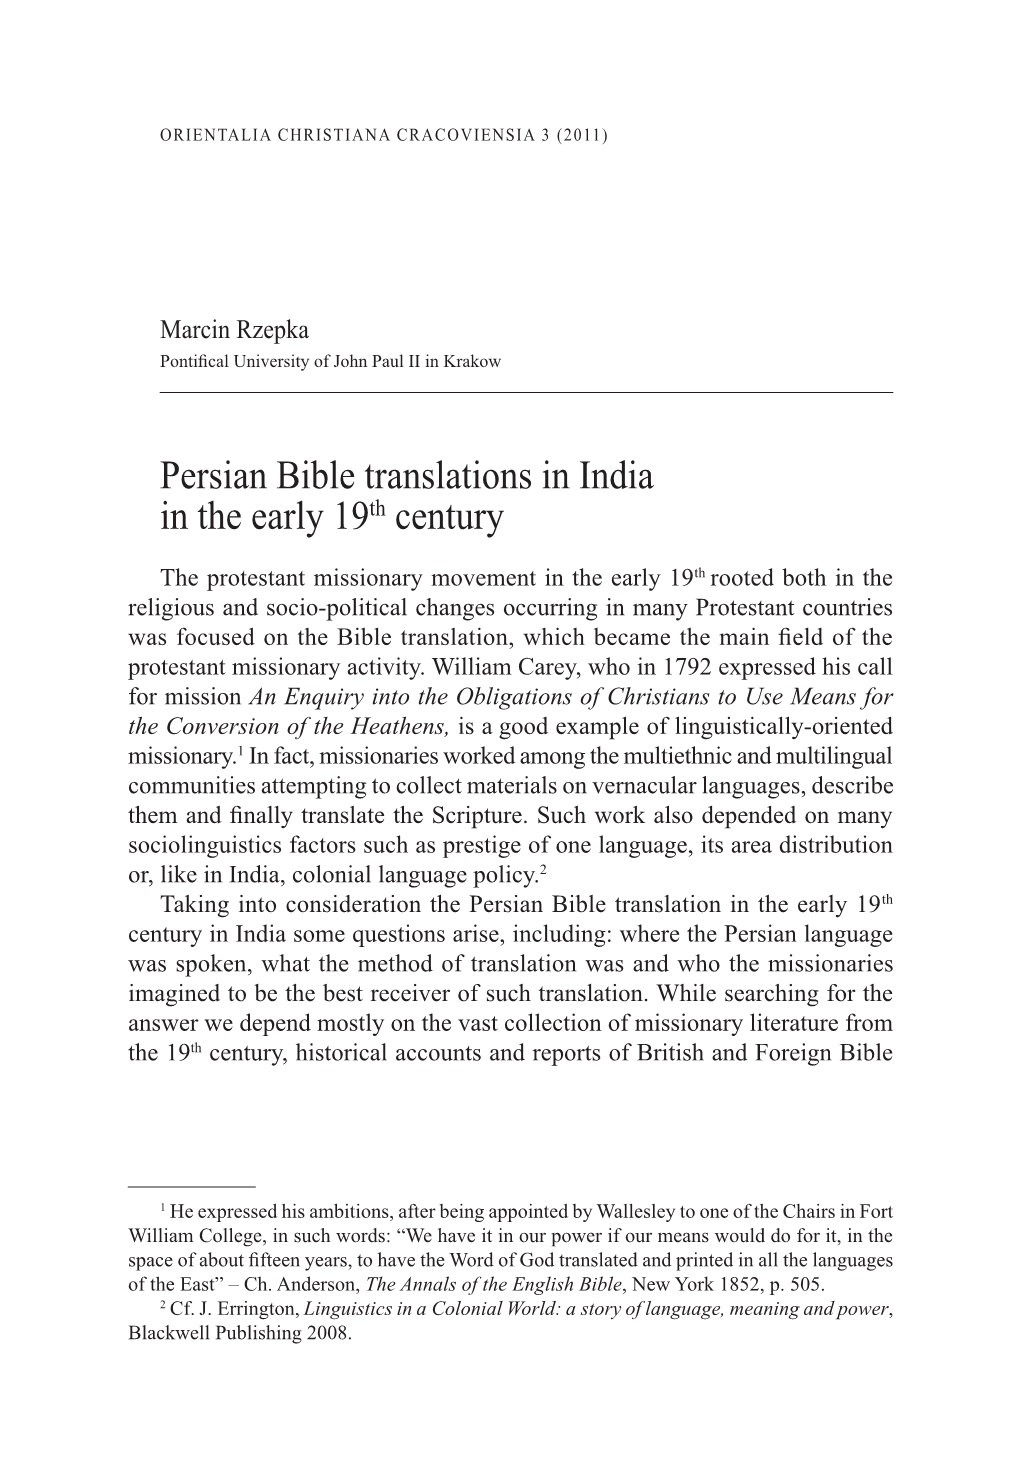 Persian Bible Translations in India in the Early 19Th Century